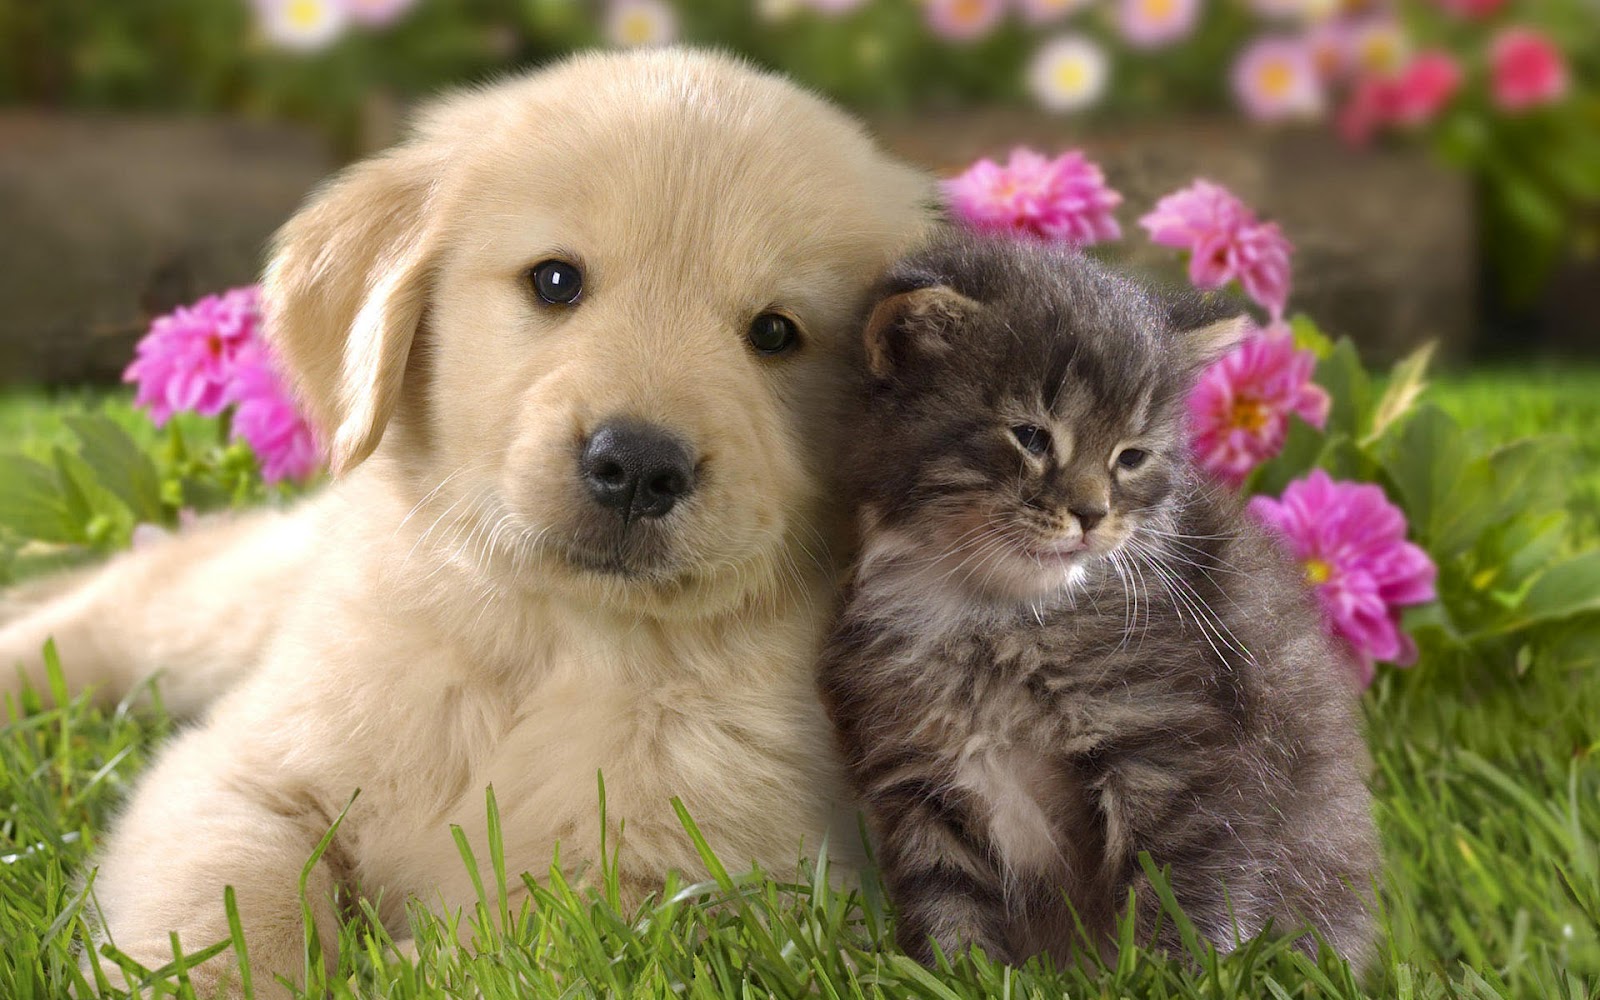 Wallpaper Pictures Of Puppies And Kittens